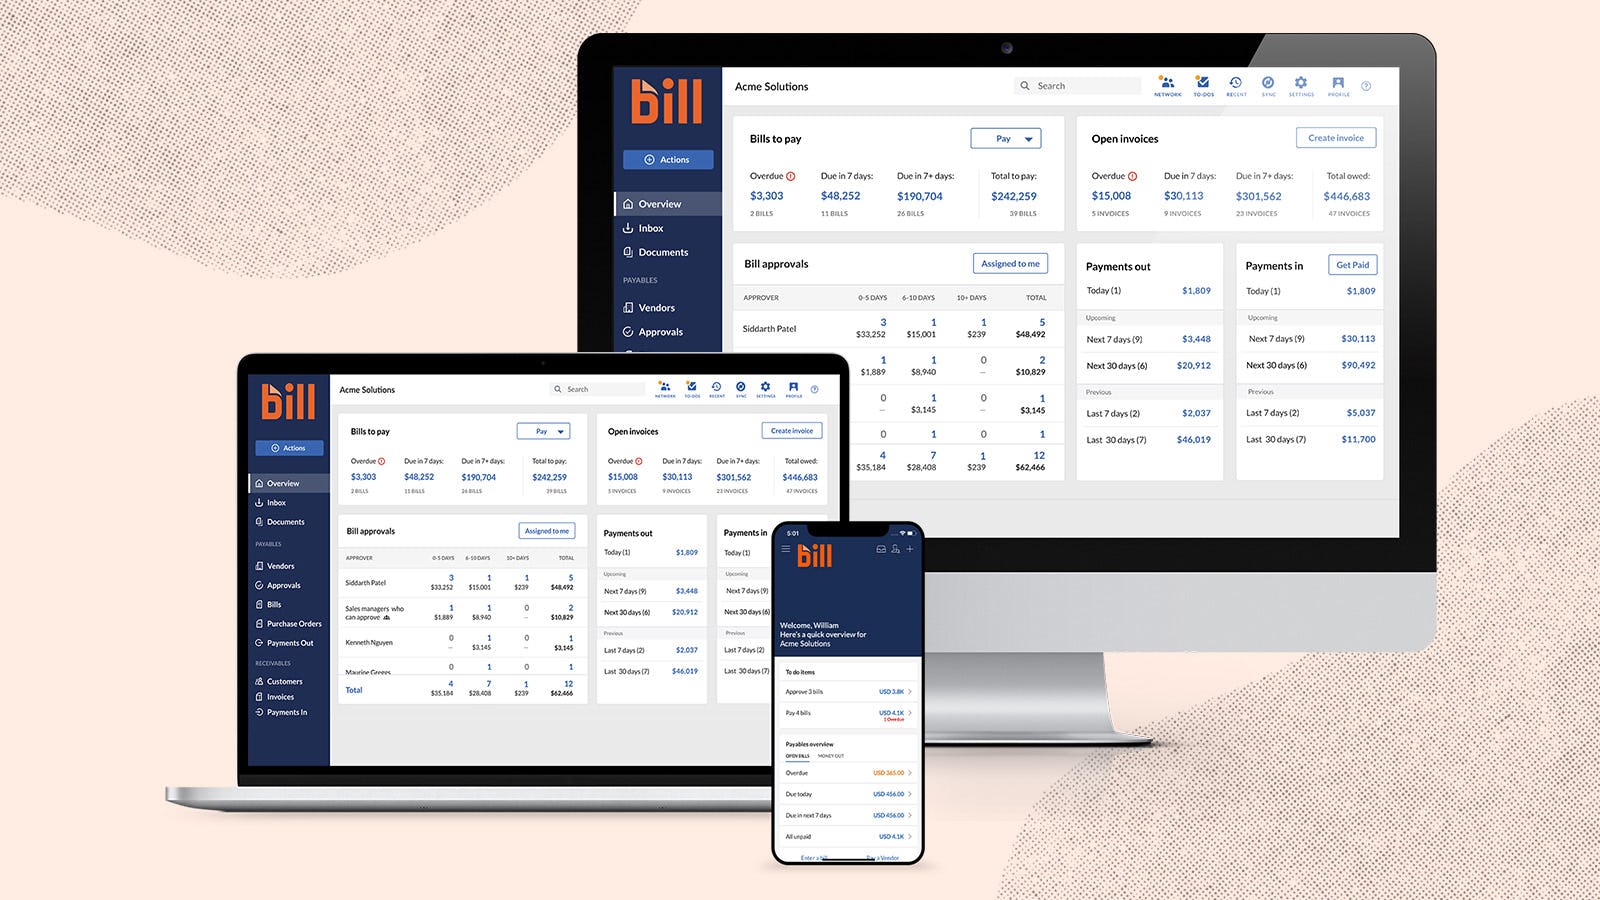 BILL Software - BILL provides both desktop and mobile applications so your team can review invoices and send payments on-the-go.